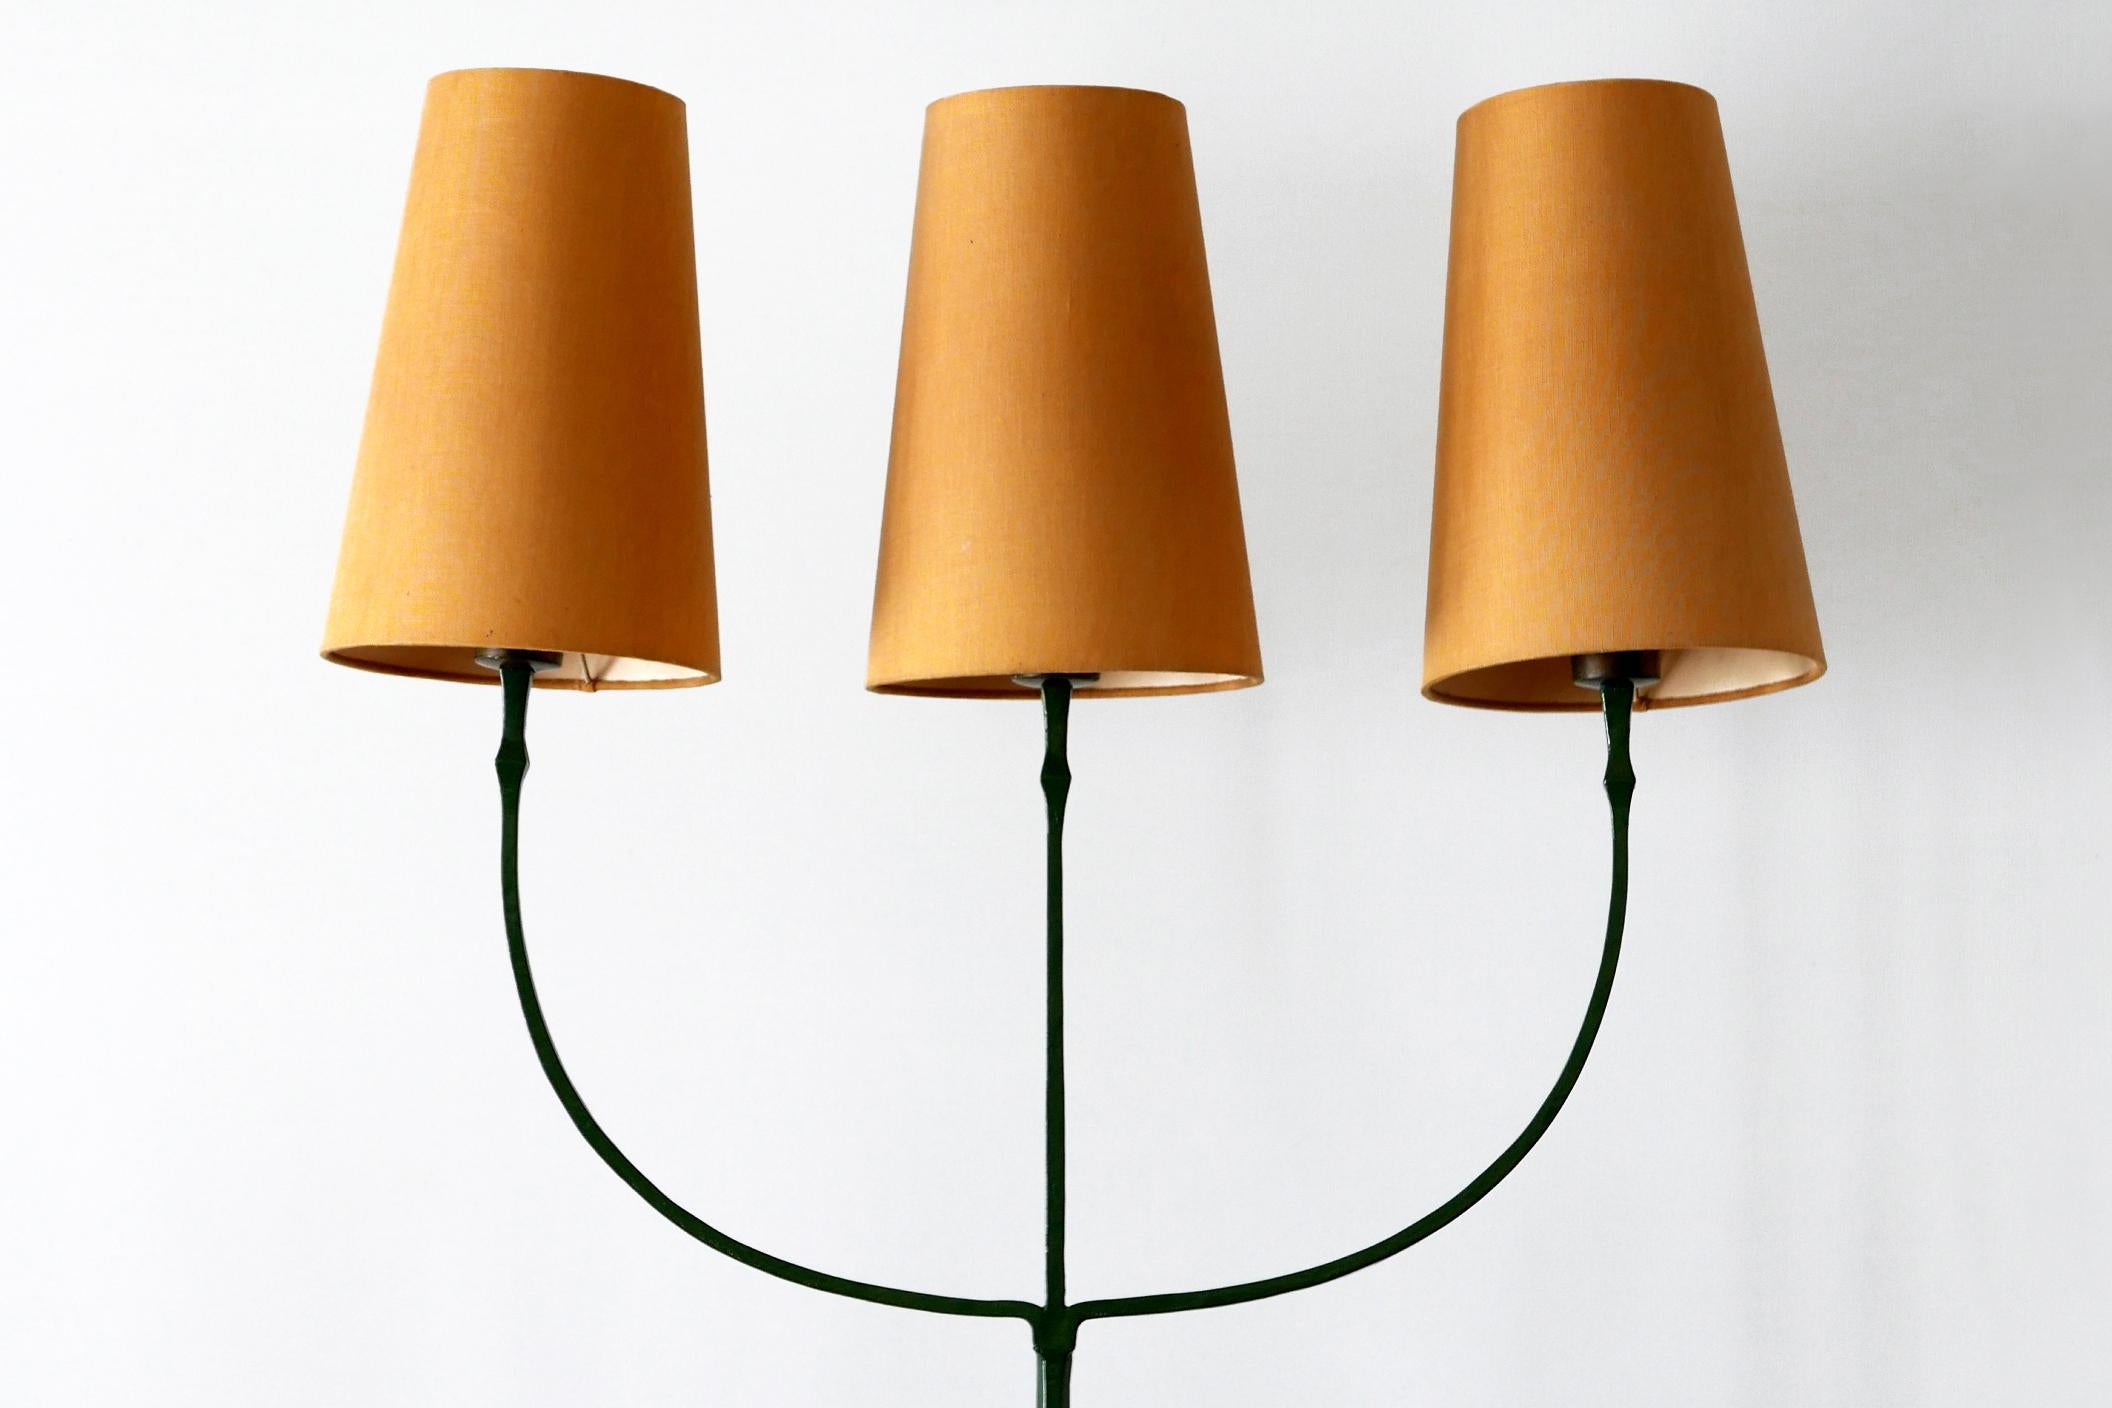 Exceptional Mid-Century Modern Three Flamed Floor Lamp, 1950s In Good Condition For Sale In Munich, DE